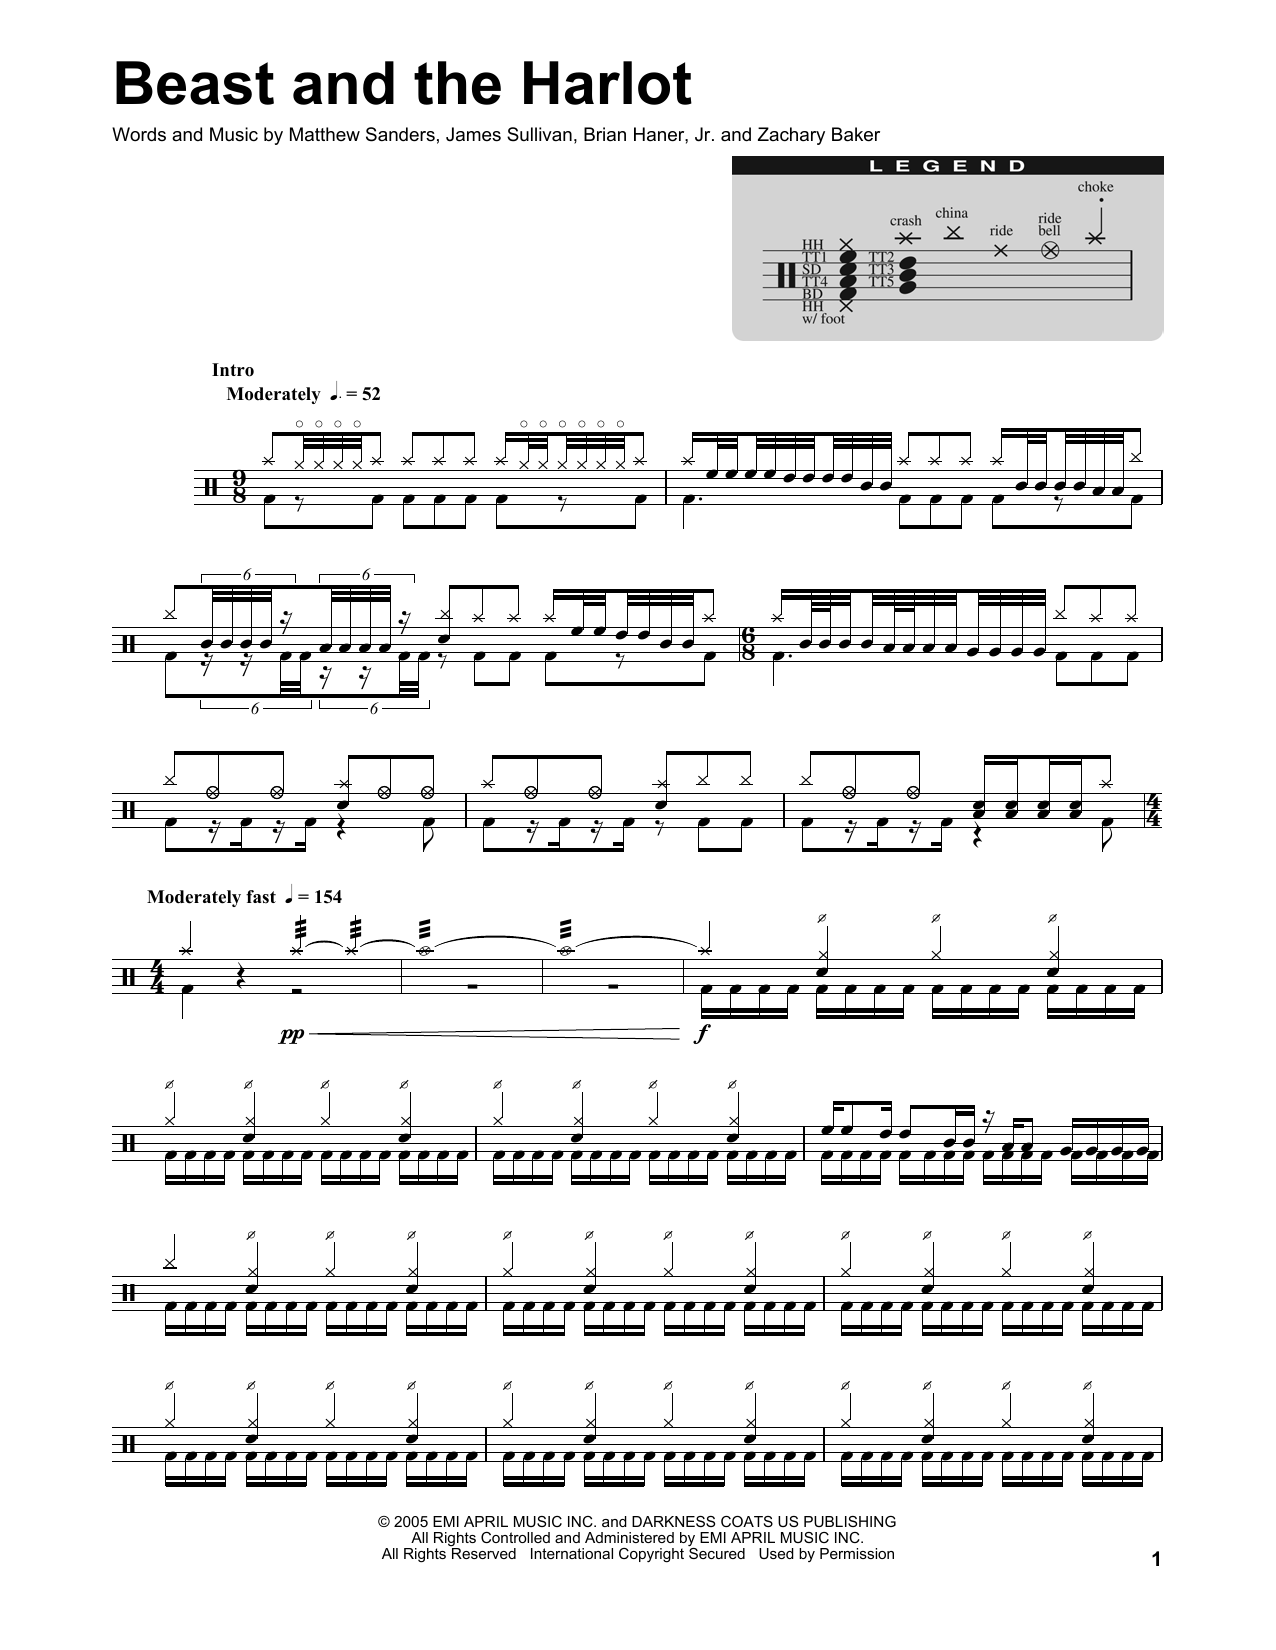 Download Avenged Sevenfold Beast And The Harlot Sheet Music